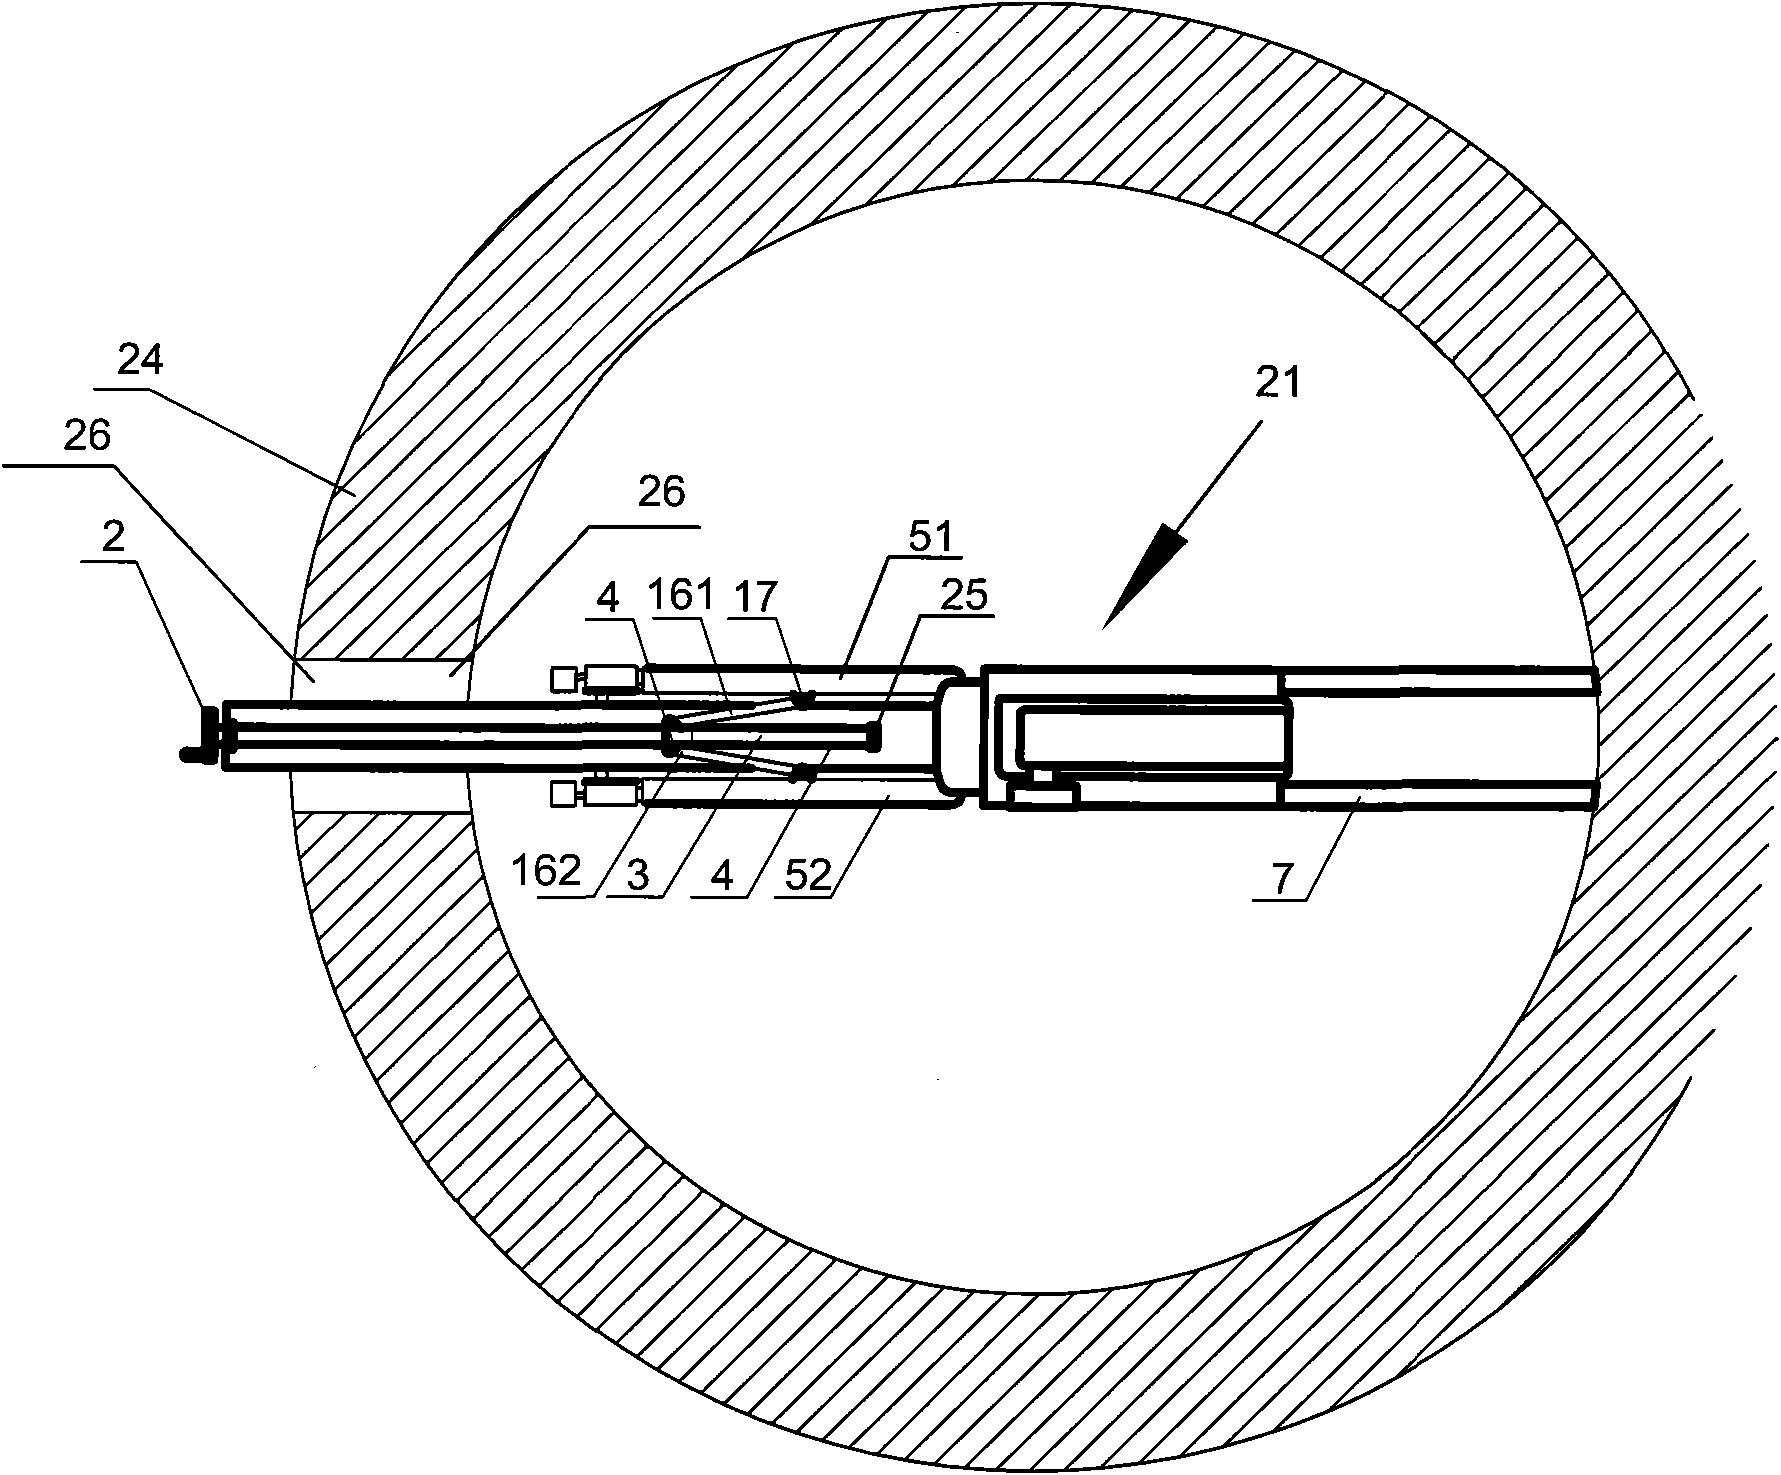 Closed circuit television inspection device